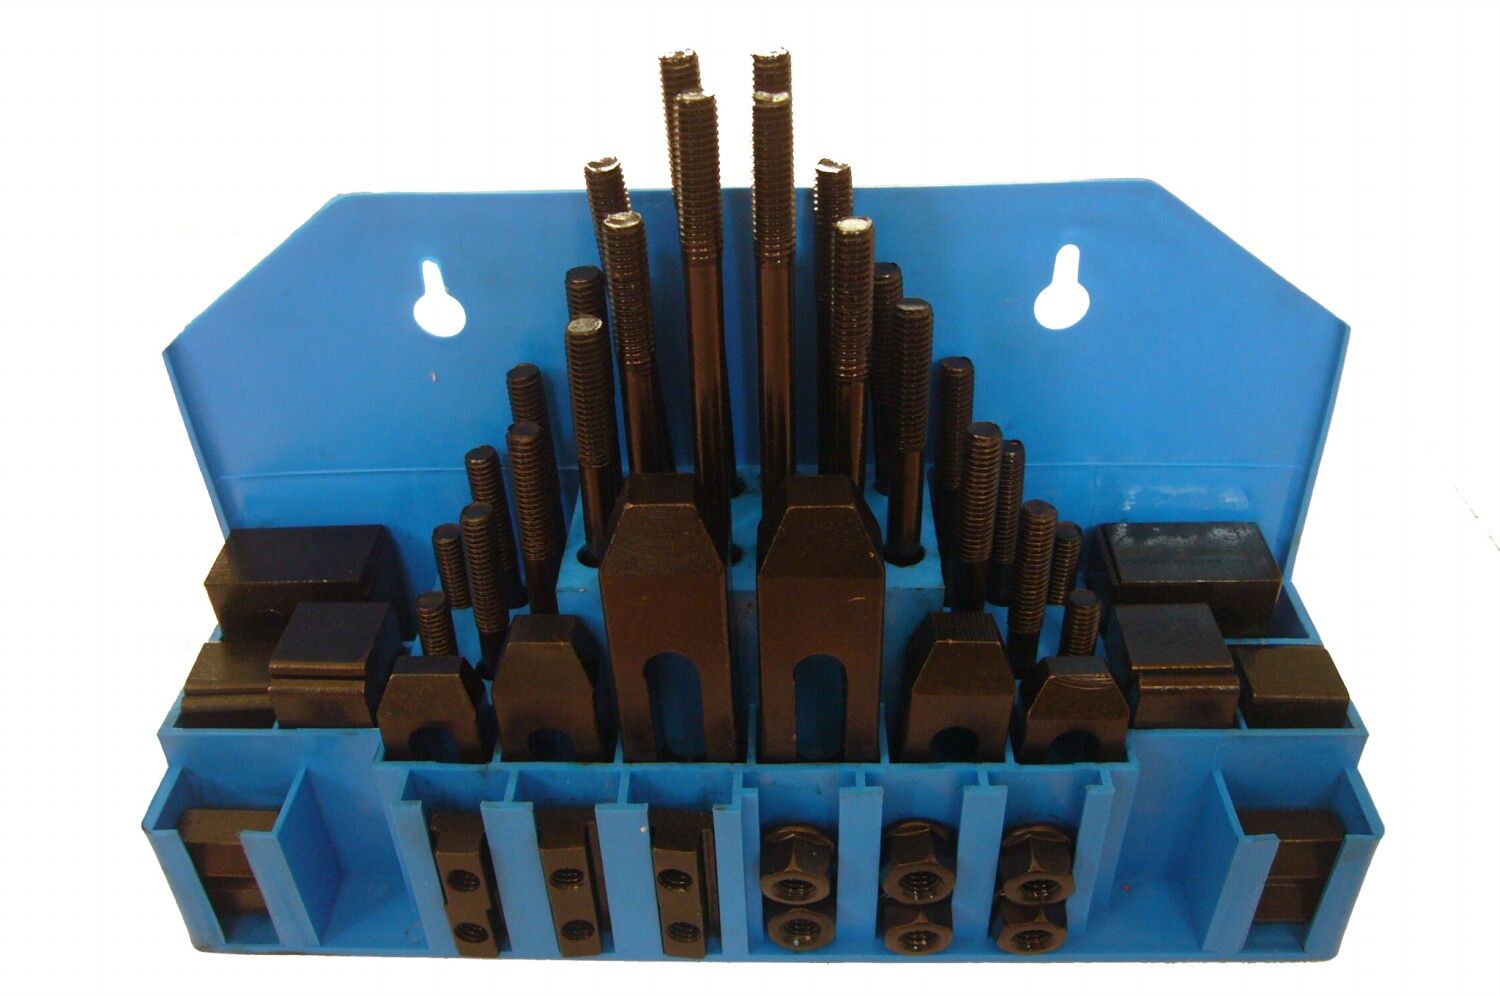 58 PIECE CLAMPING KIT 3/4" T-SLOT WITH 5/8-11 STUDS (3900-0003)